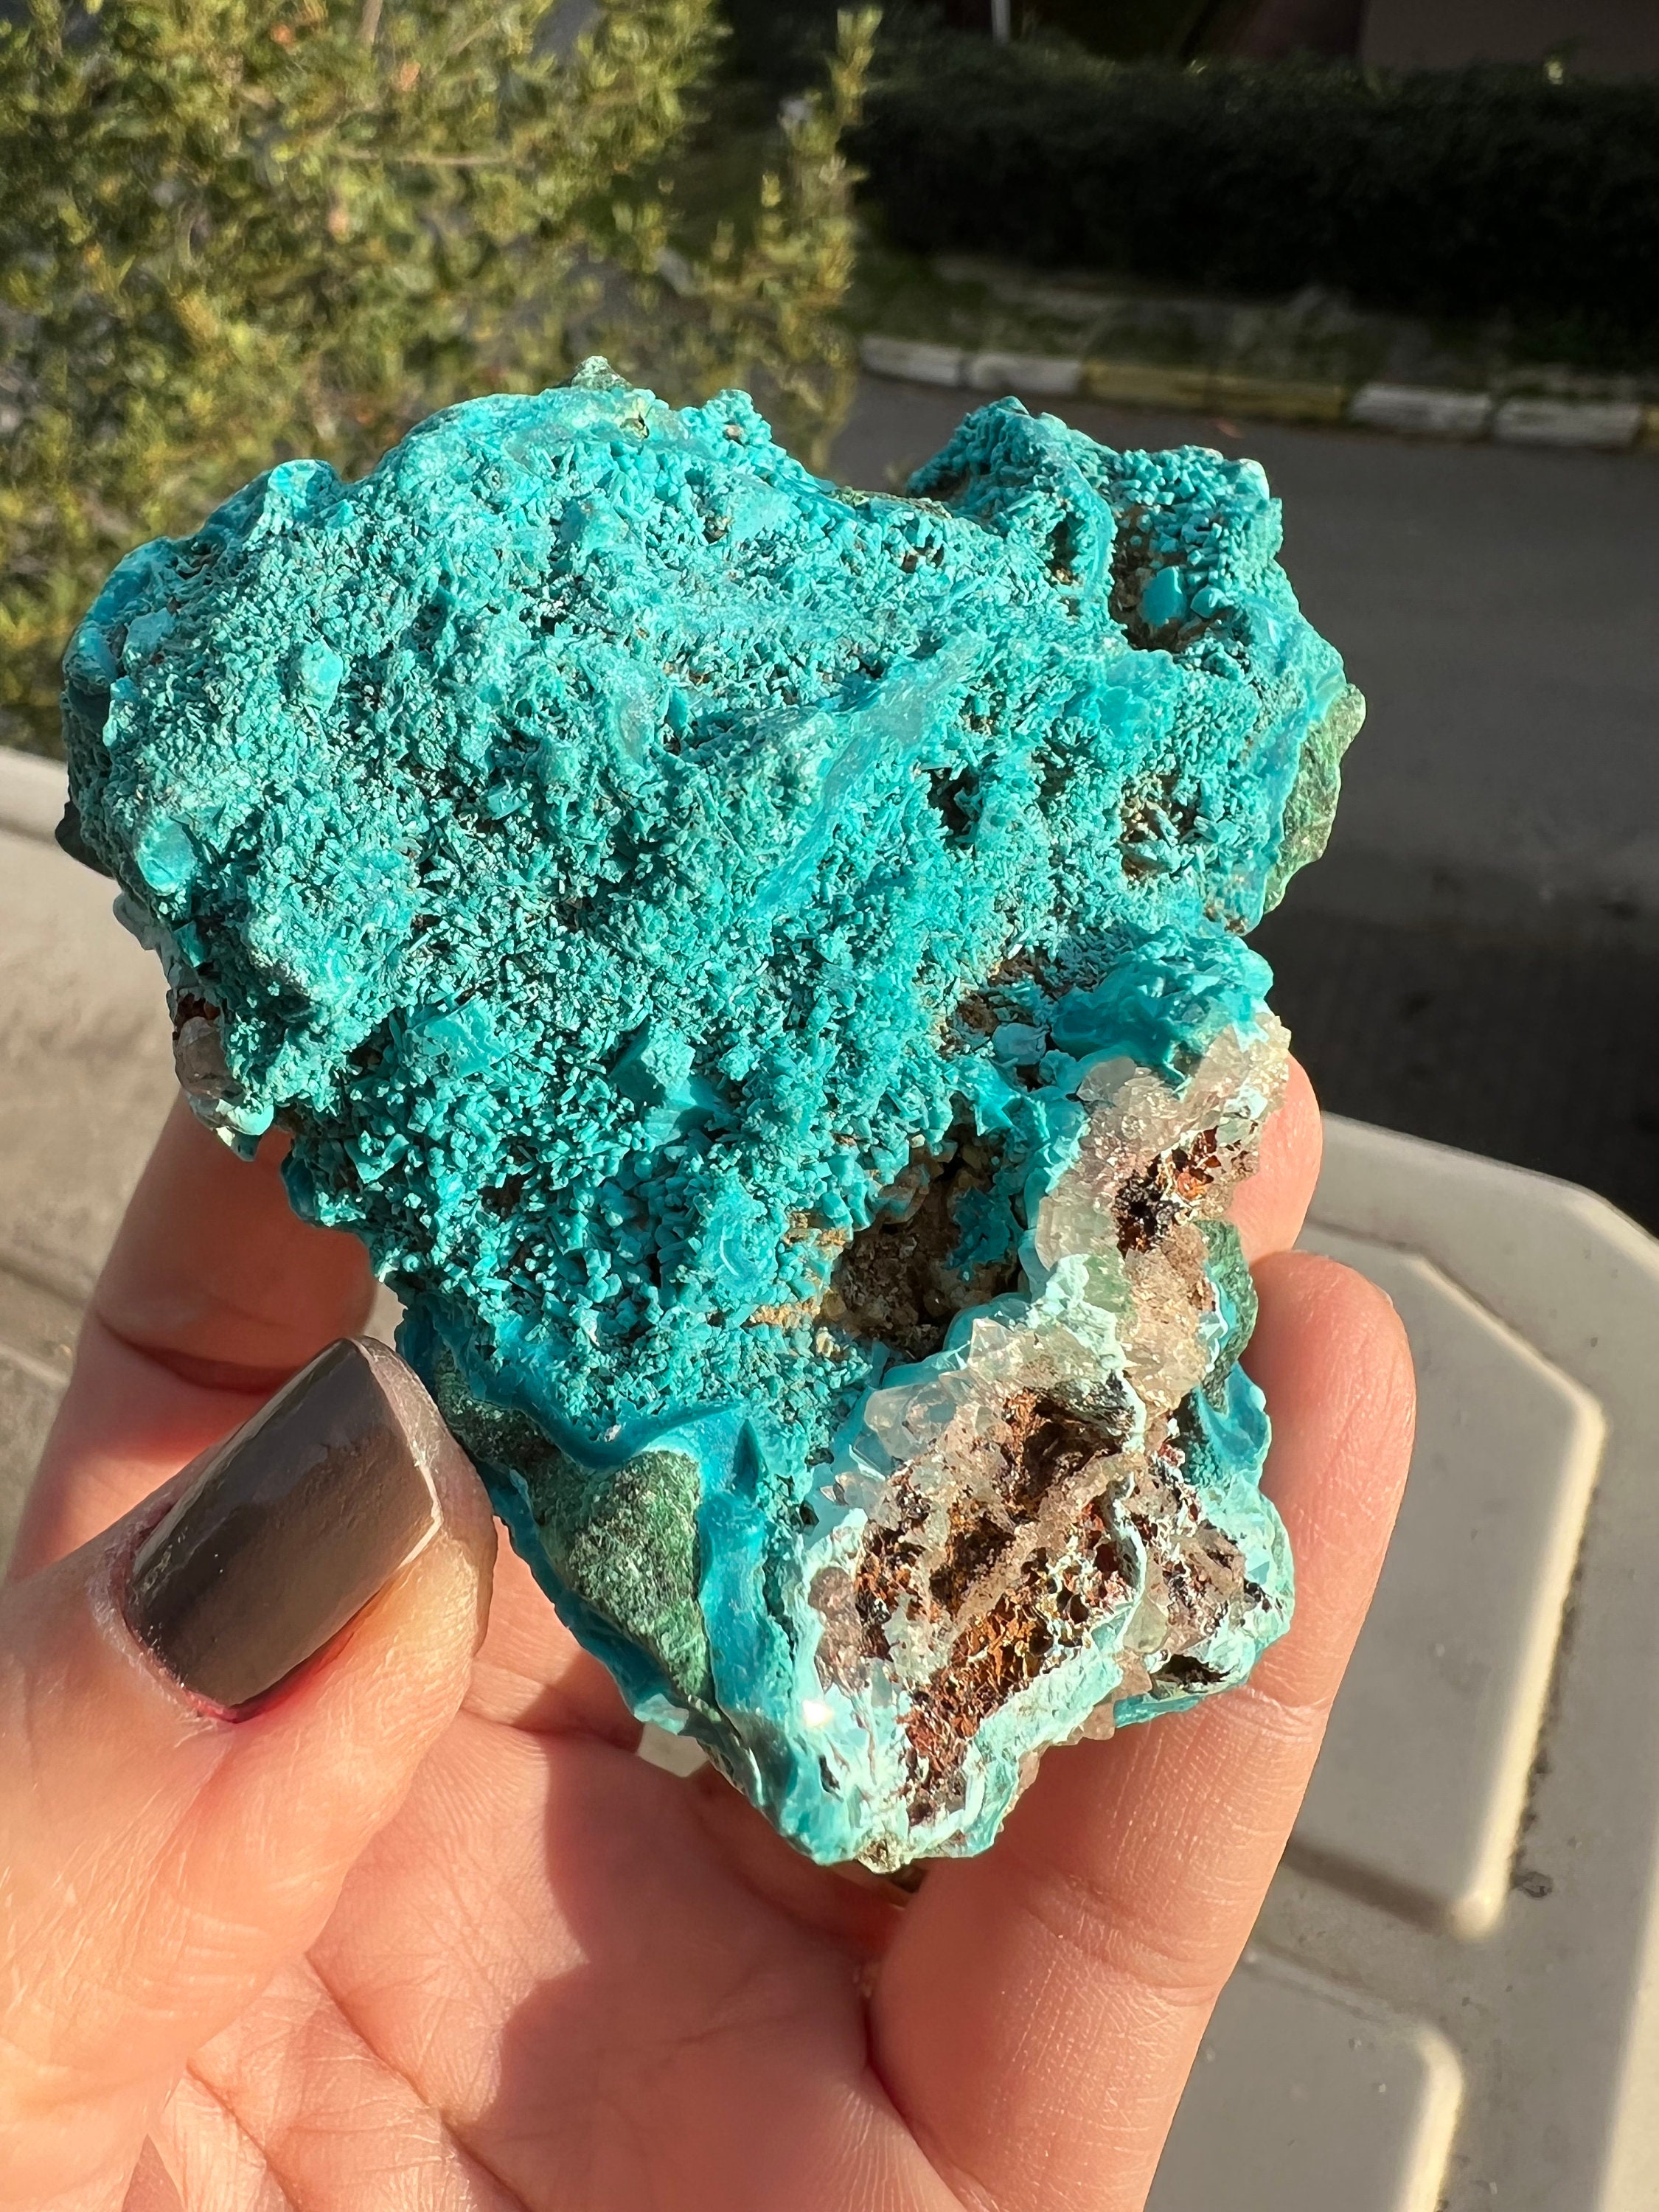 Amazing Rare Pseudomorph Blue Chrysocolla After Malachite Very Nice Blades & Rich Blue Color